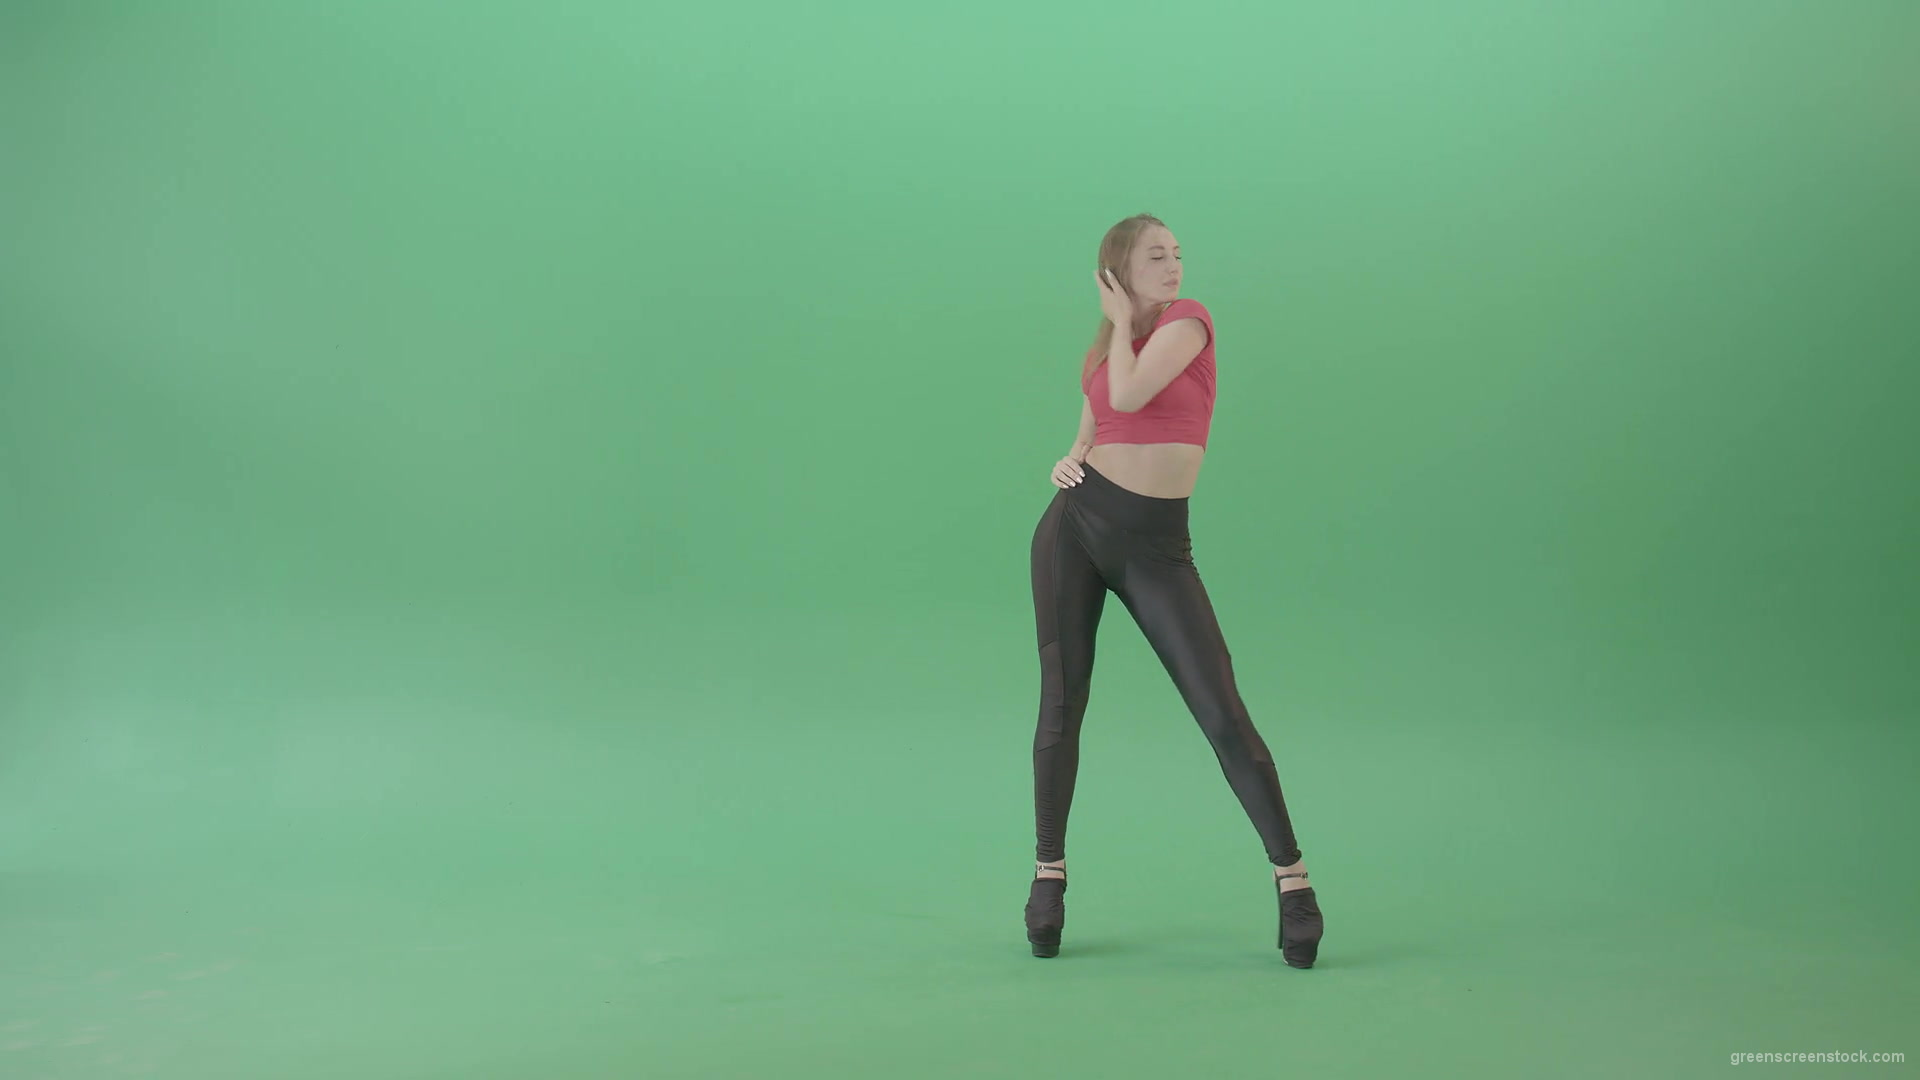 Passion-sexy-girl-on-green-screen-in-red-posing-strip-dance-4K-Video-Footage-1920_009 Green Screen Stock